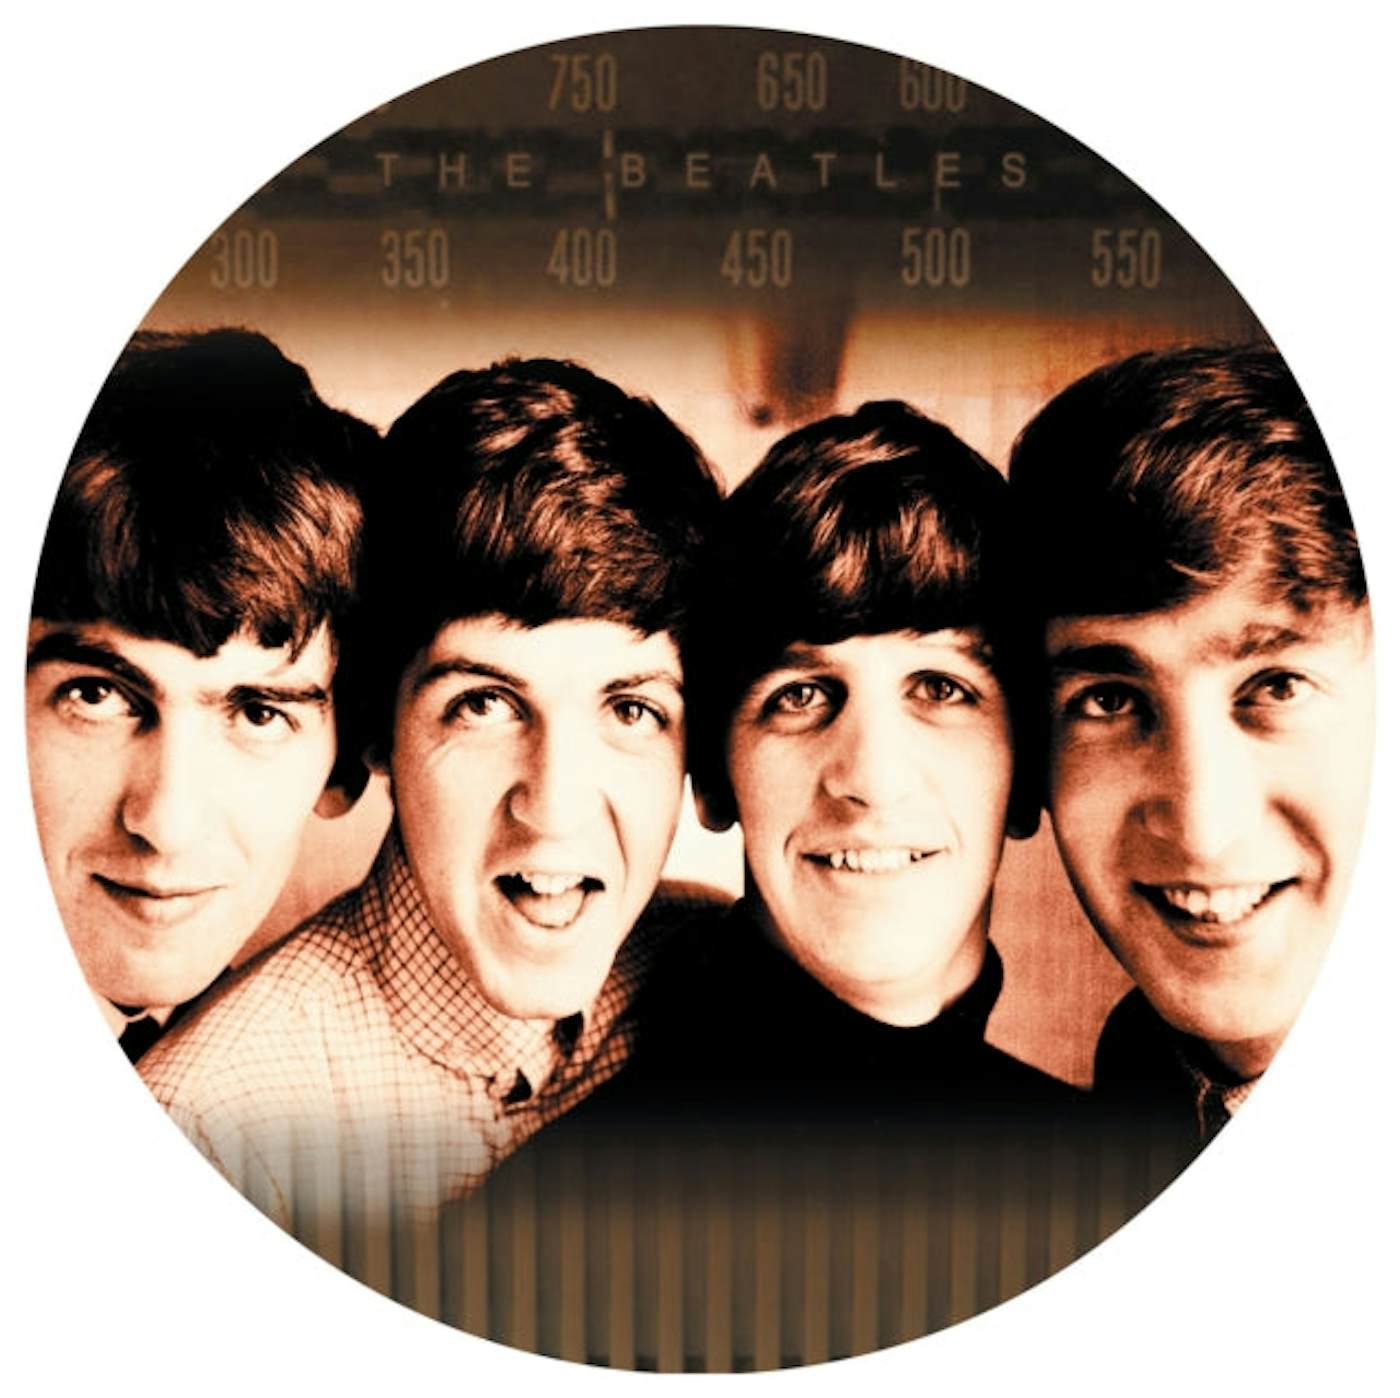 beatles reel to reel products for sale